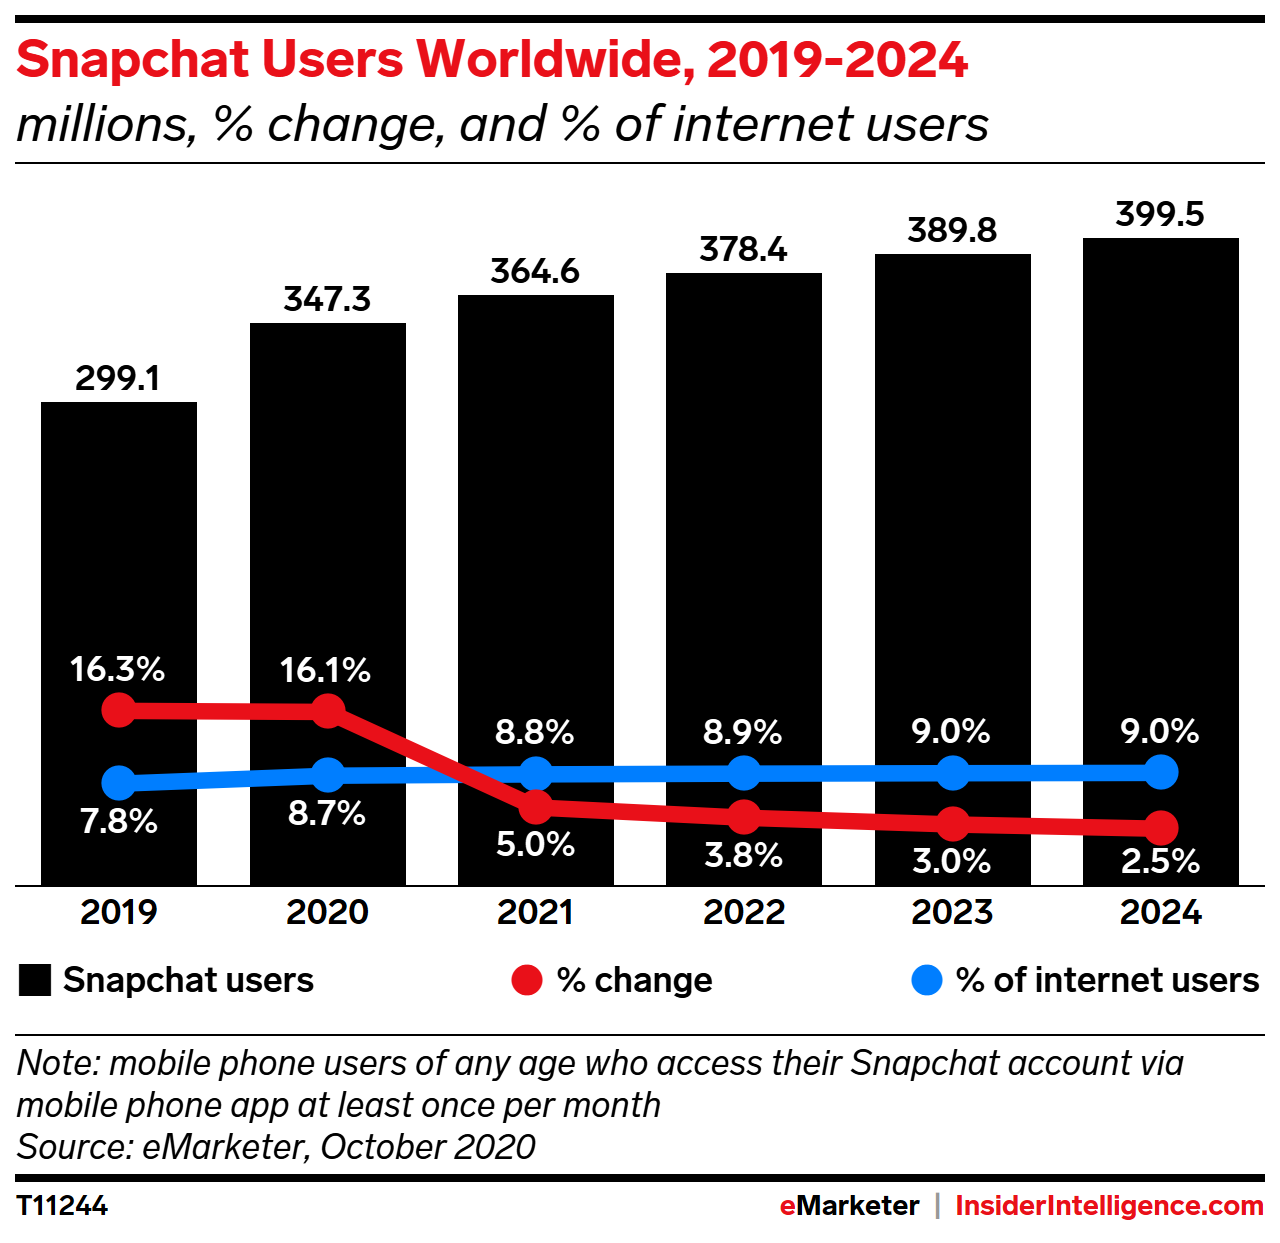 Snapchat Users Worldwide, 2019-2024 (millions, % change, and % of internet users)